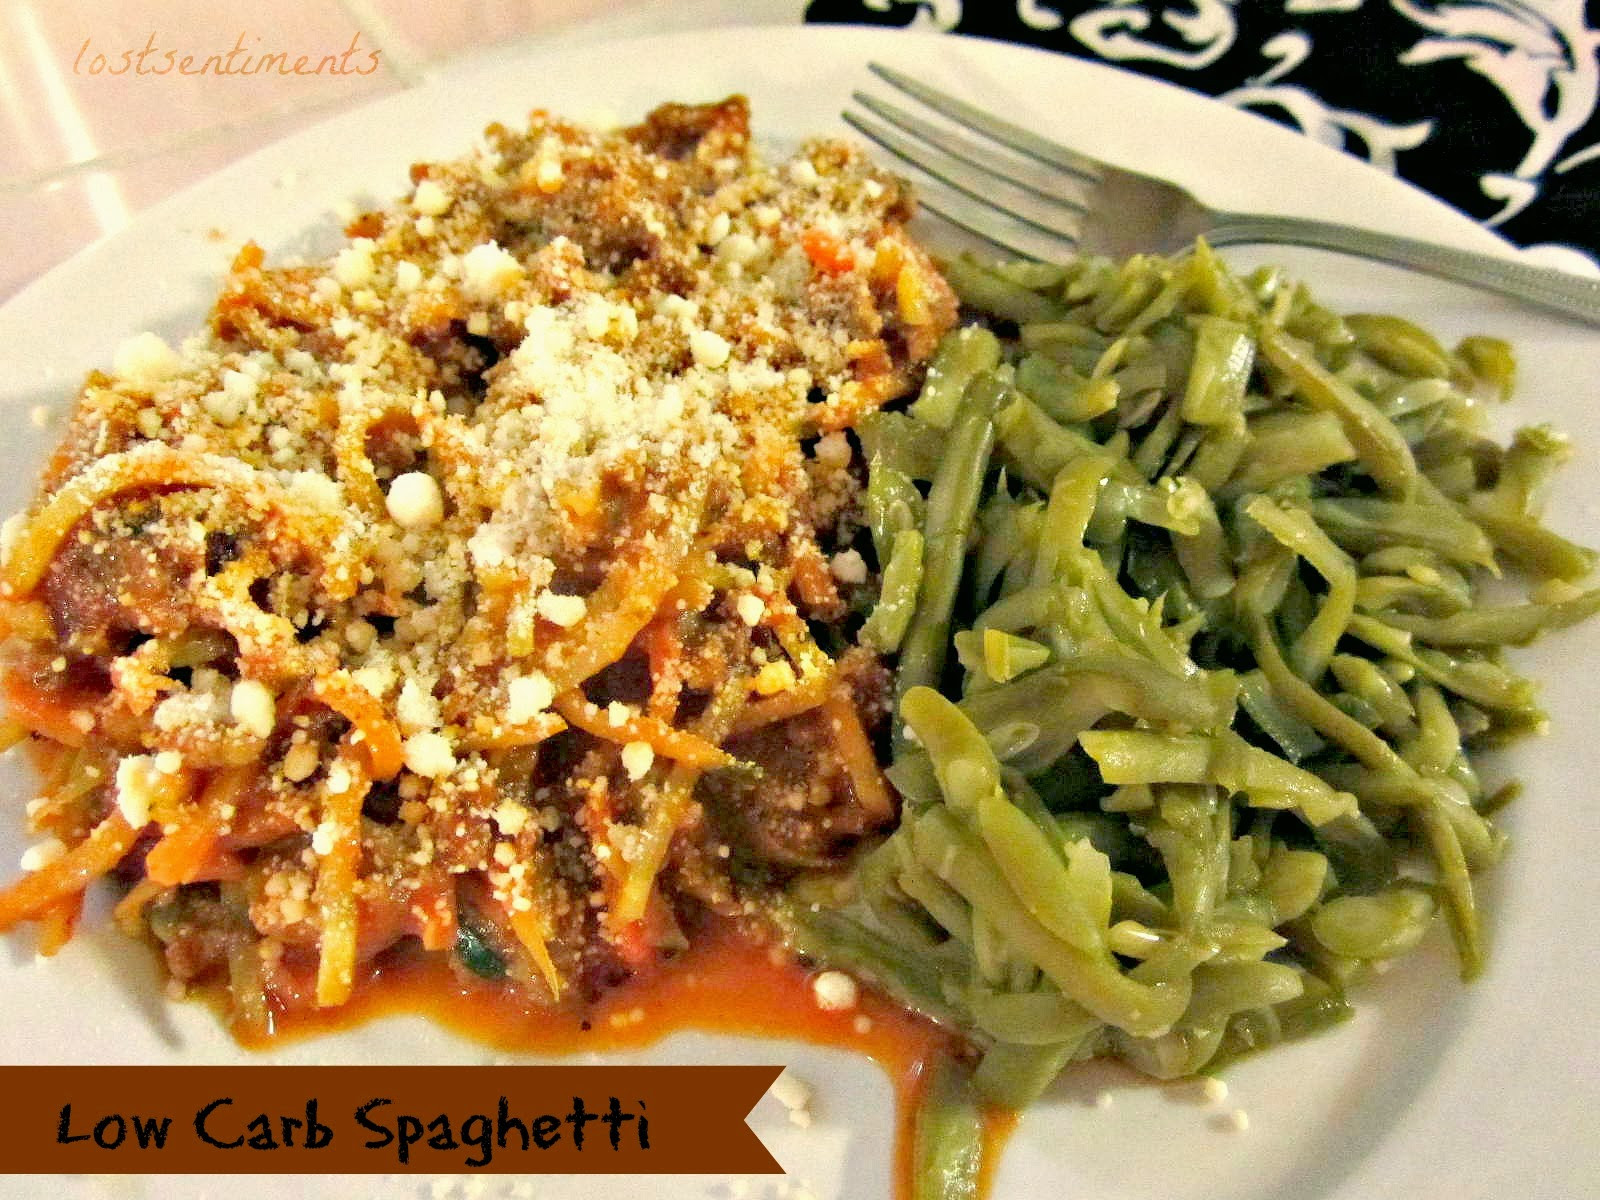 Low Carb Spaghetti Recipe
 lostsentiments Low Carb Spaghetti Recipe